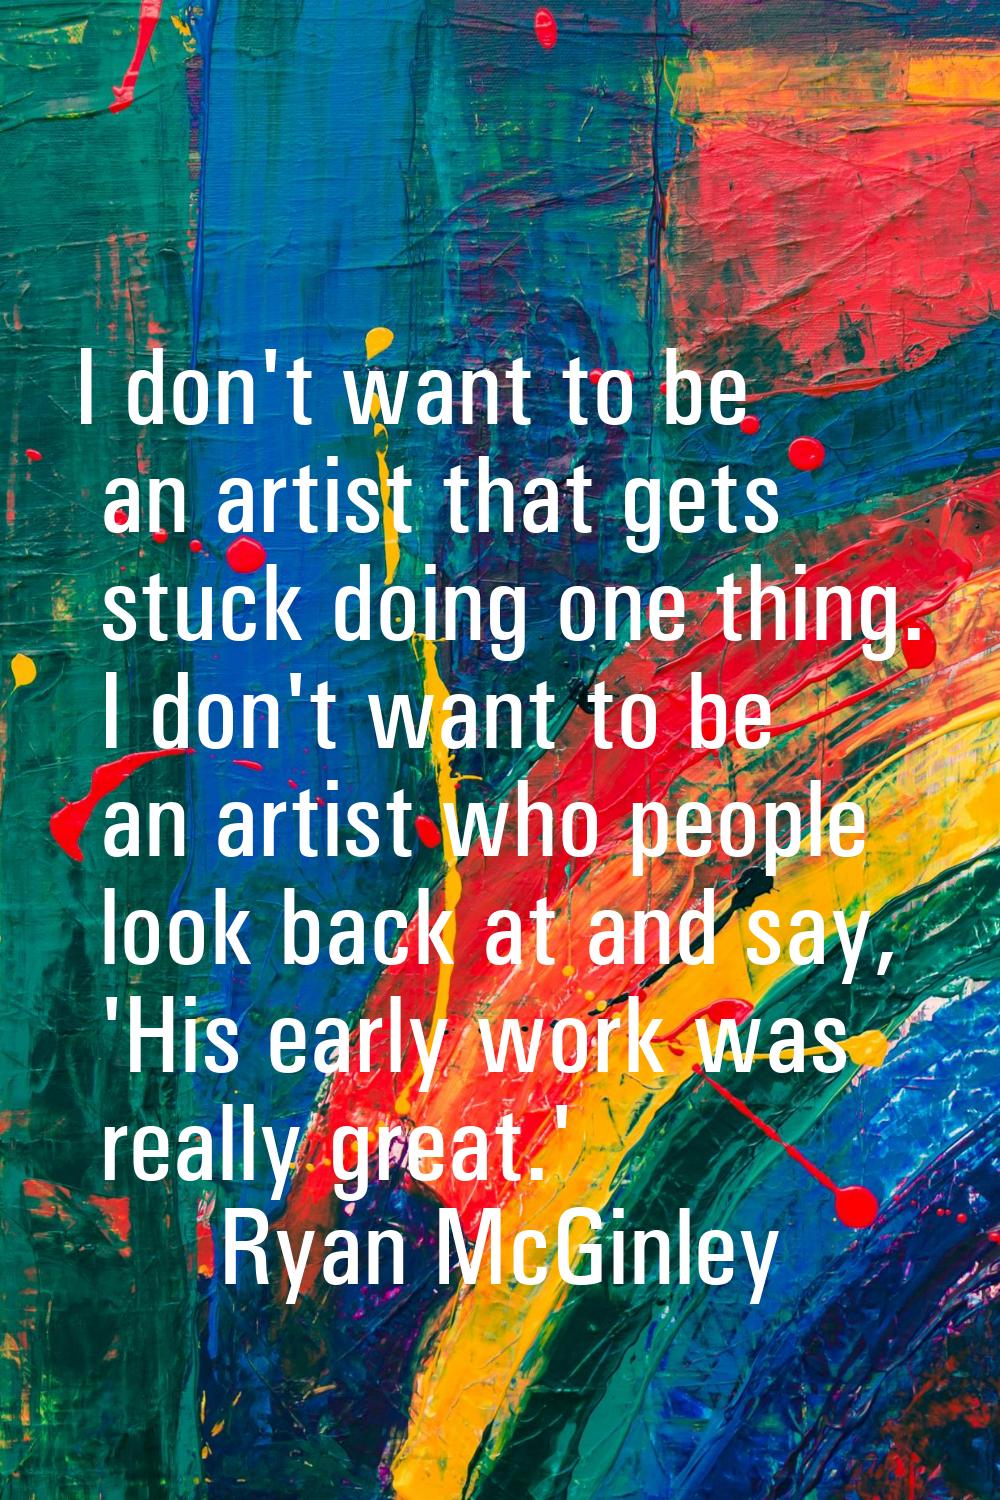 I don't want to be an artist that gets stuck doing one thing. I don't want to be an artist who peop